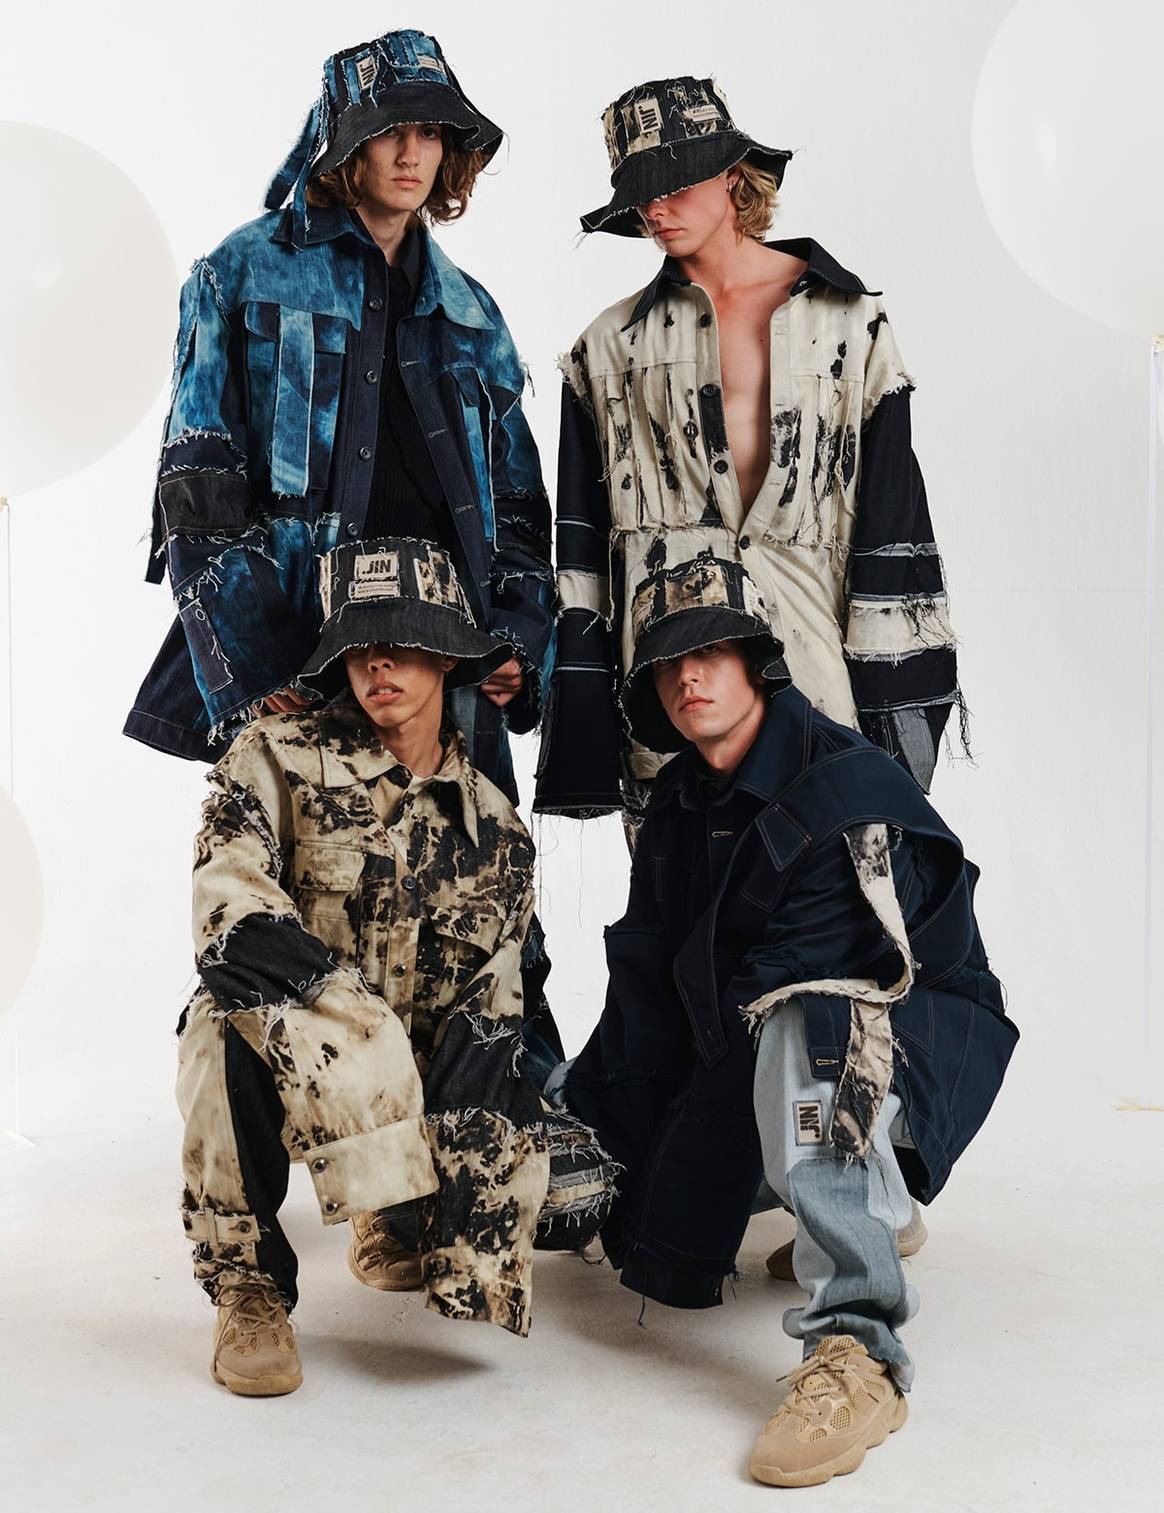 Four graduation looks by LCI Barcelona student Jin Bing:
reworked denim and natural dyes.